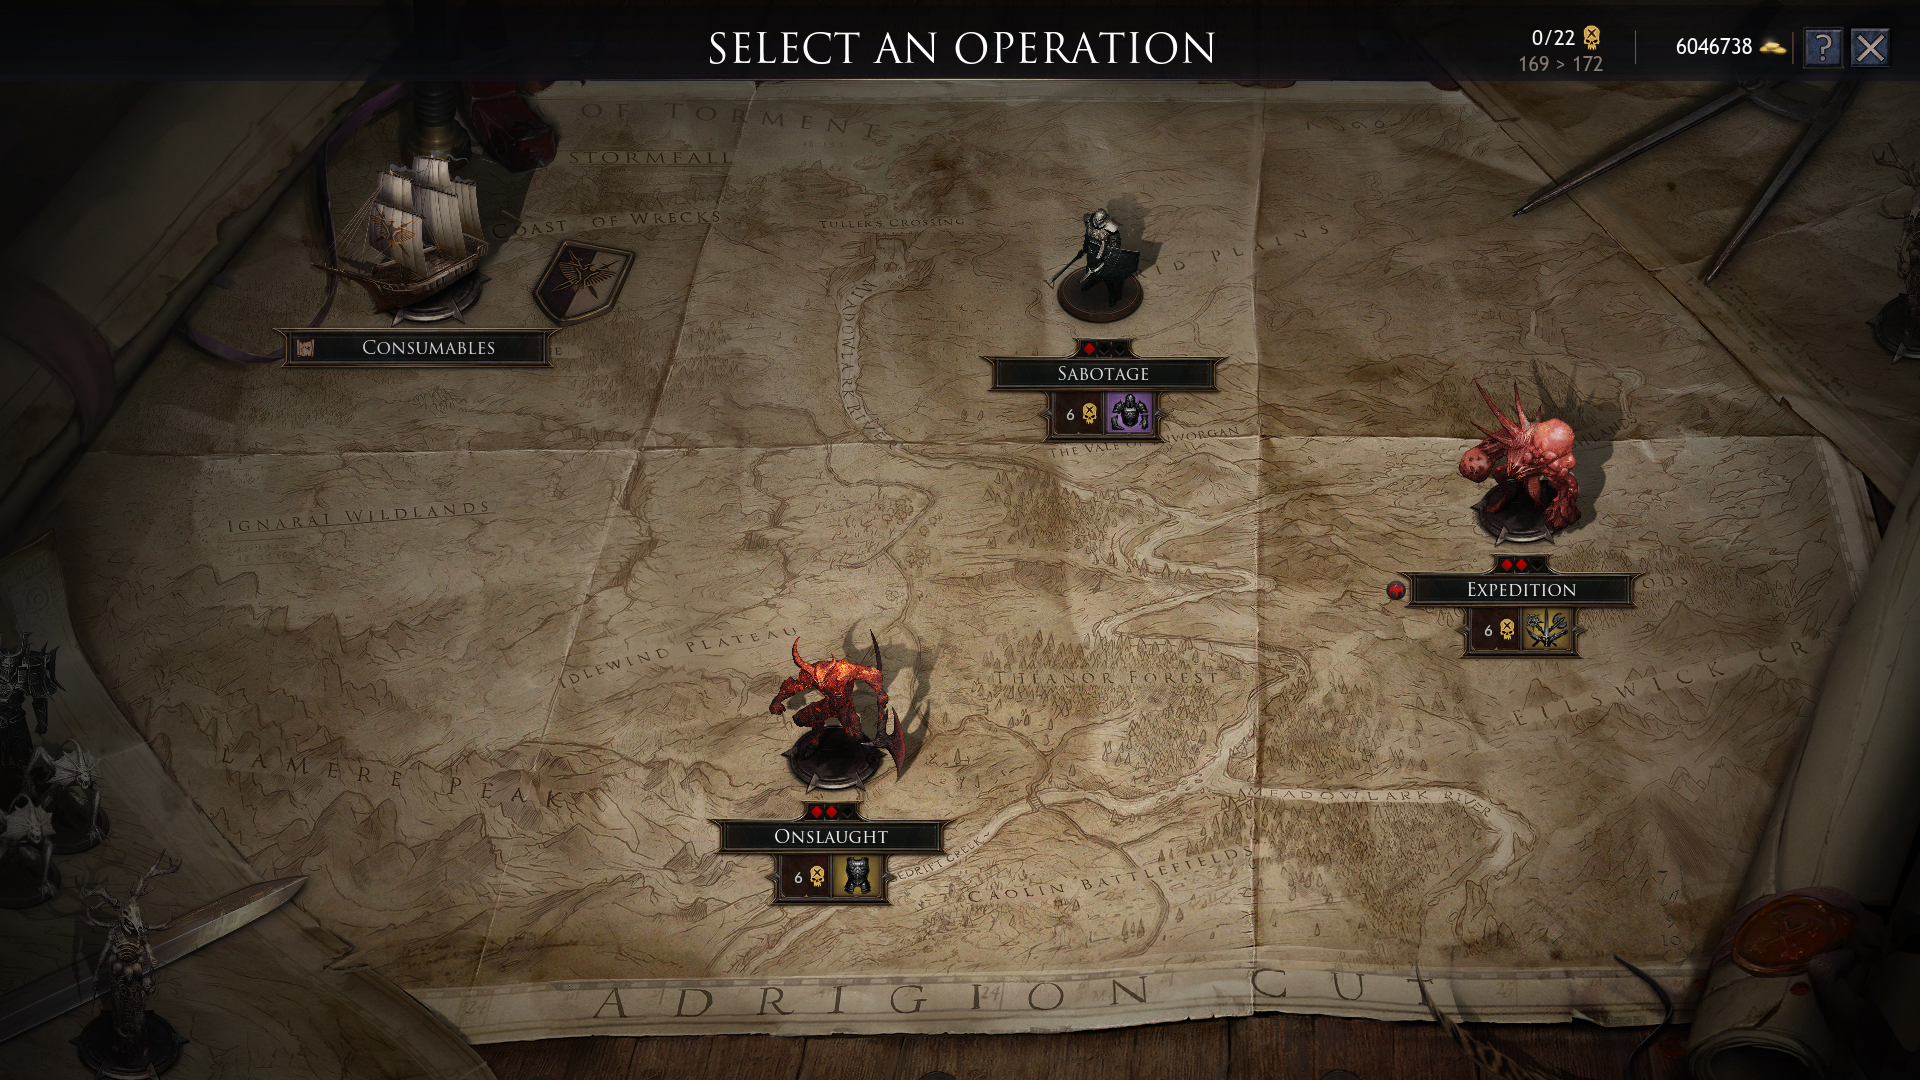 Game UI of Honor of Kings 1v1. In the main screen, there are four